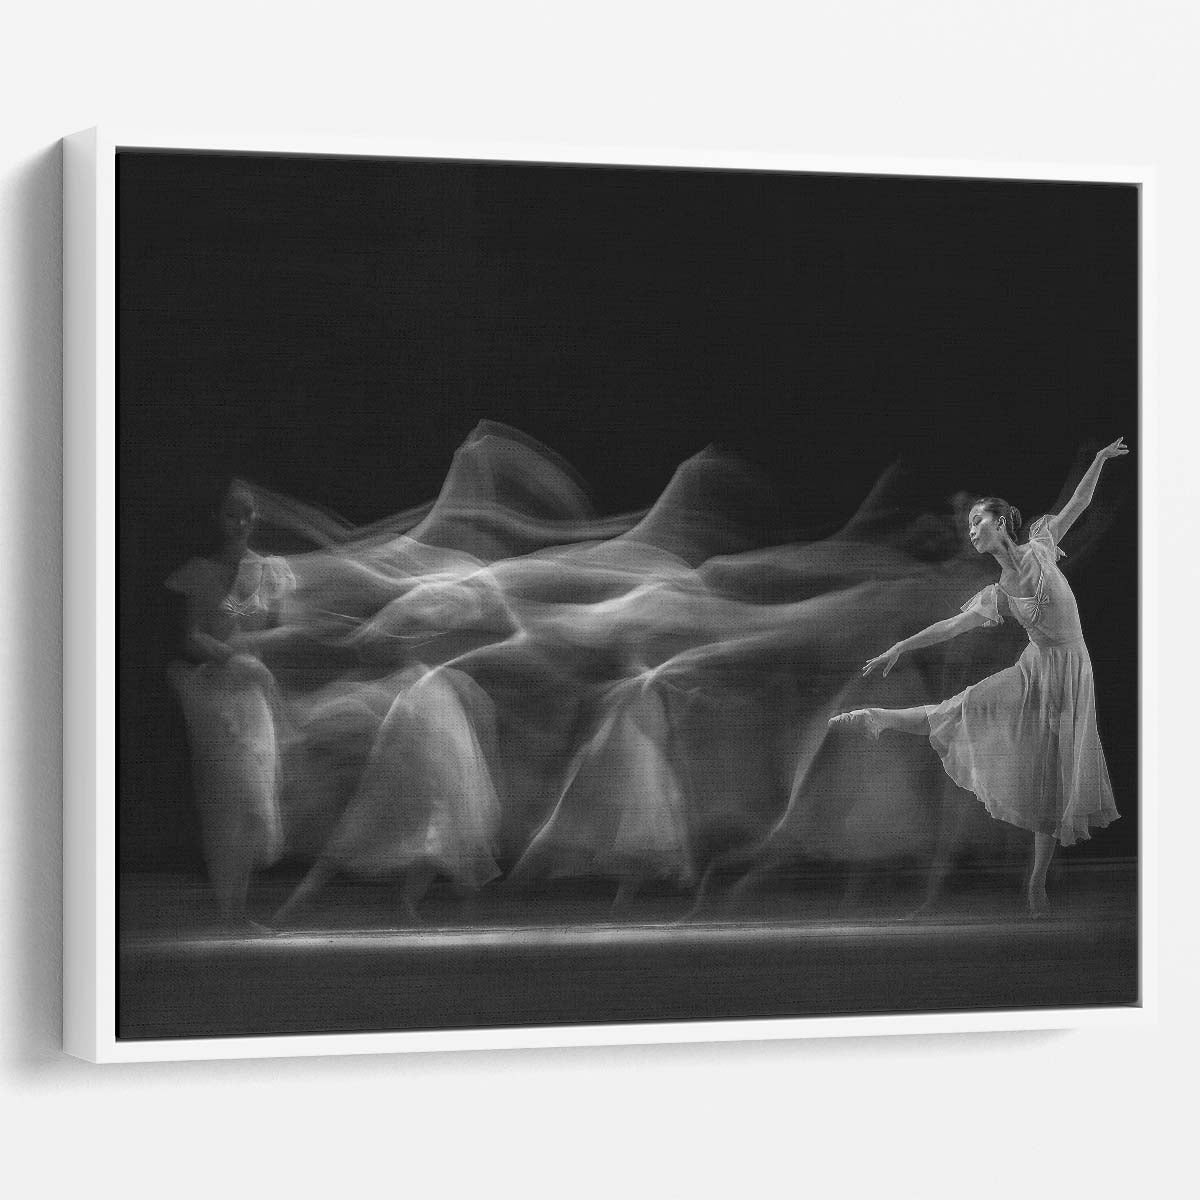 Graceful Ballerina in Motion Monochrome Dance Wall Art by Luxuriance Designs. Made in USA.